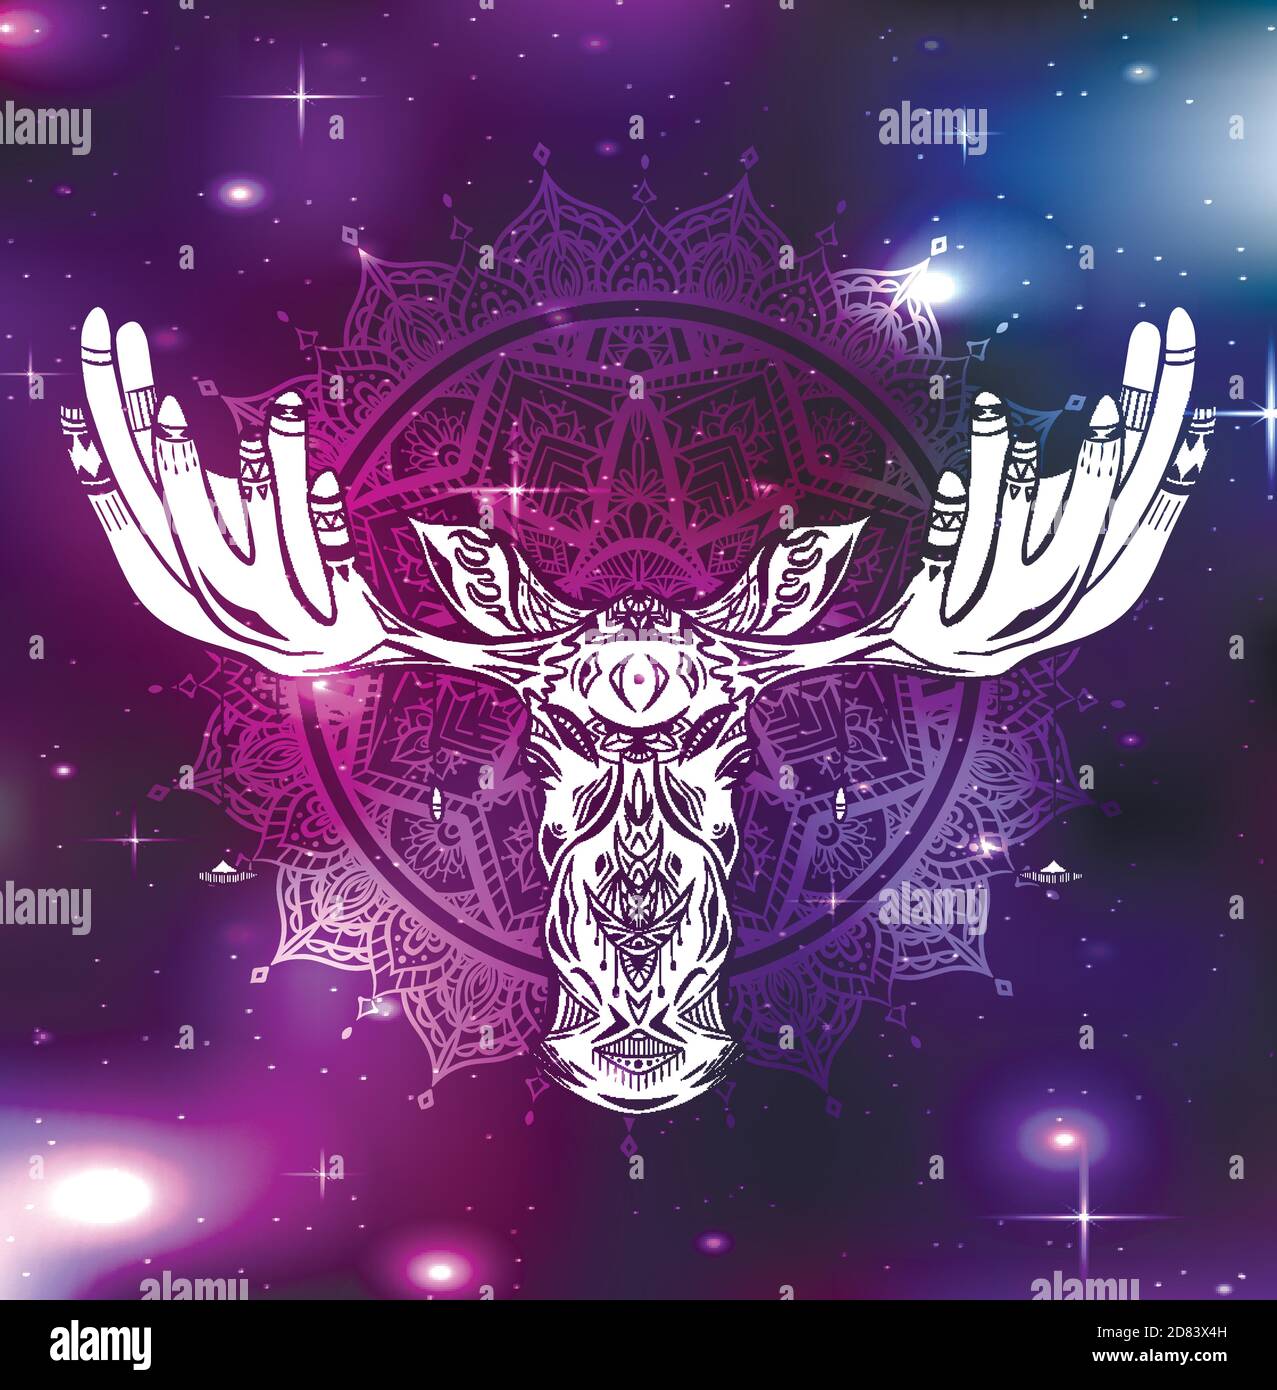 Contour native illustration of a moose head with ethnic decoration and bead on horns on mandala space background. Boho vector illustration in universe Stock Vector